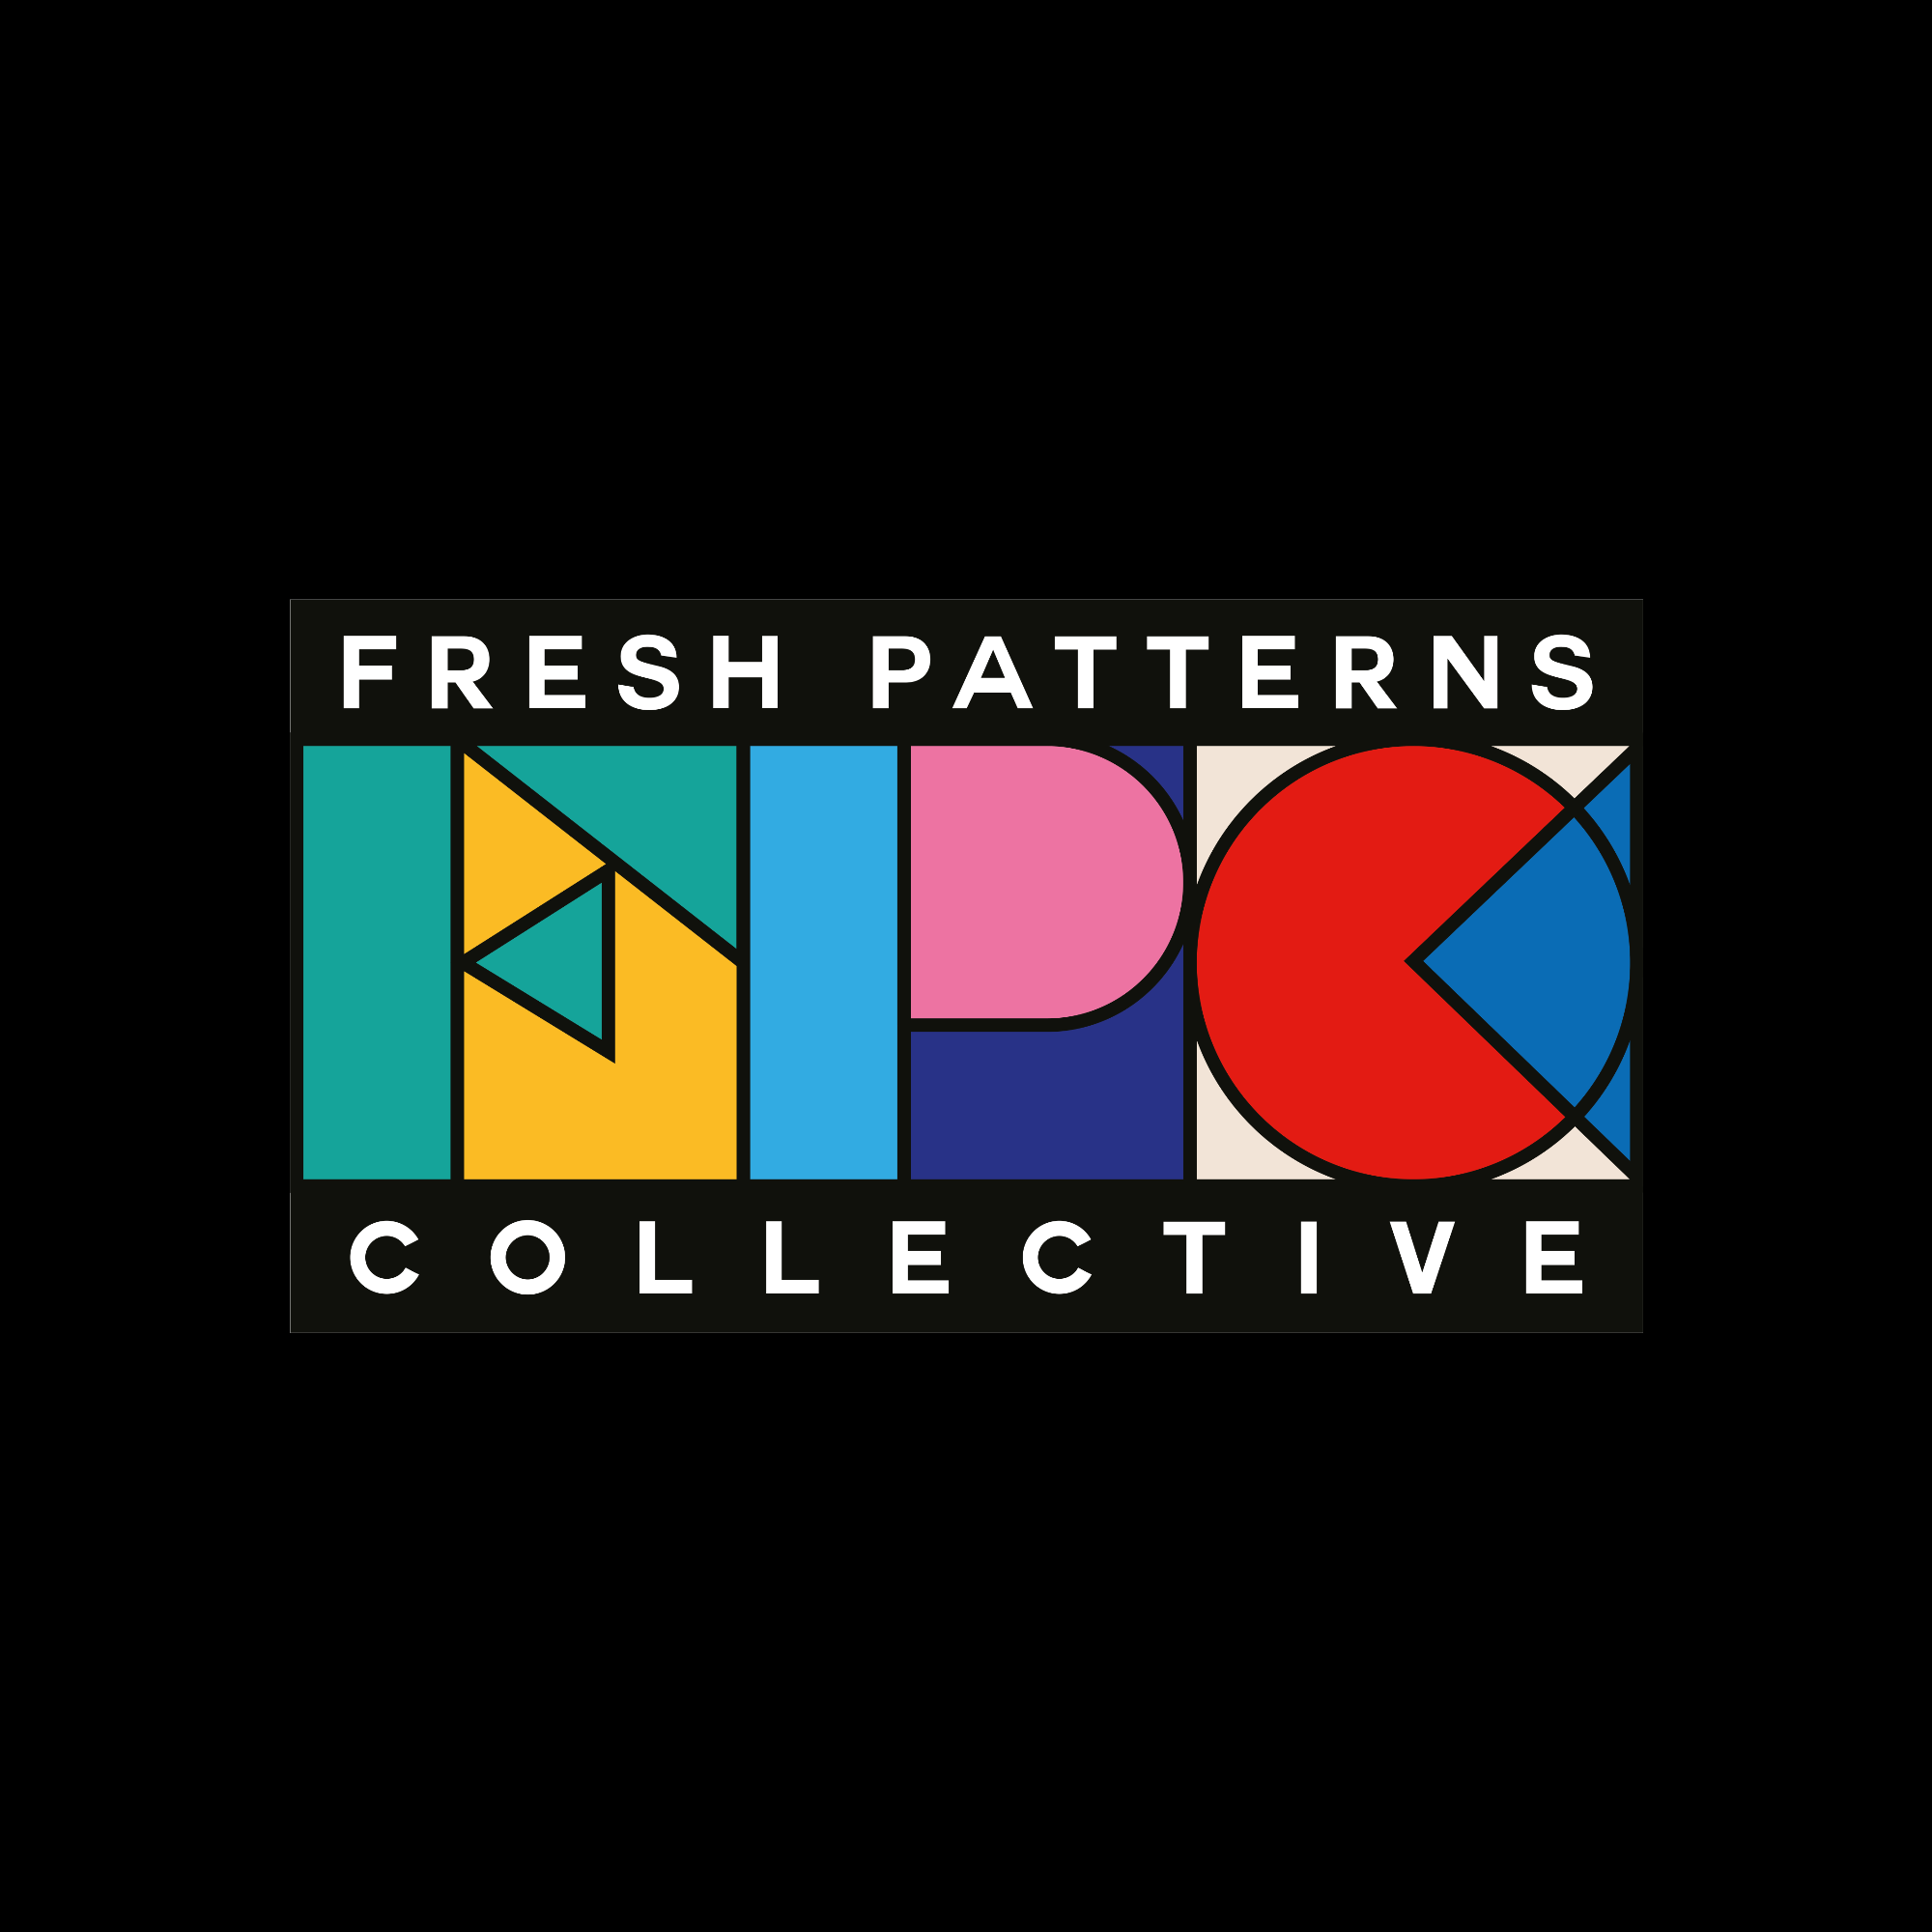 The Fresh Patterns Collective